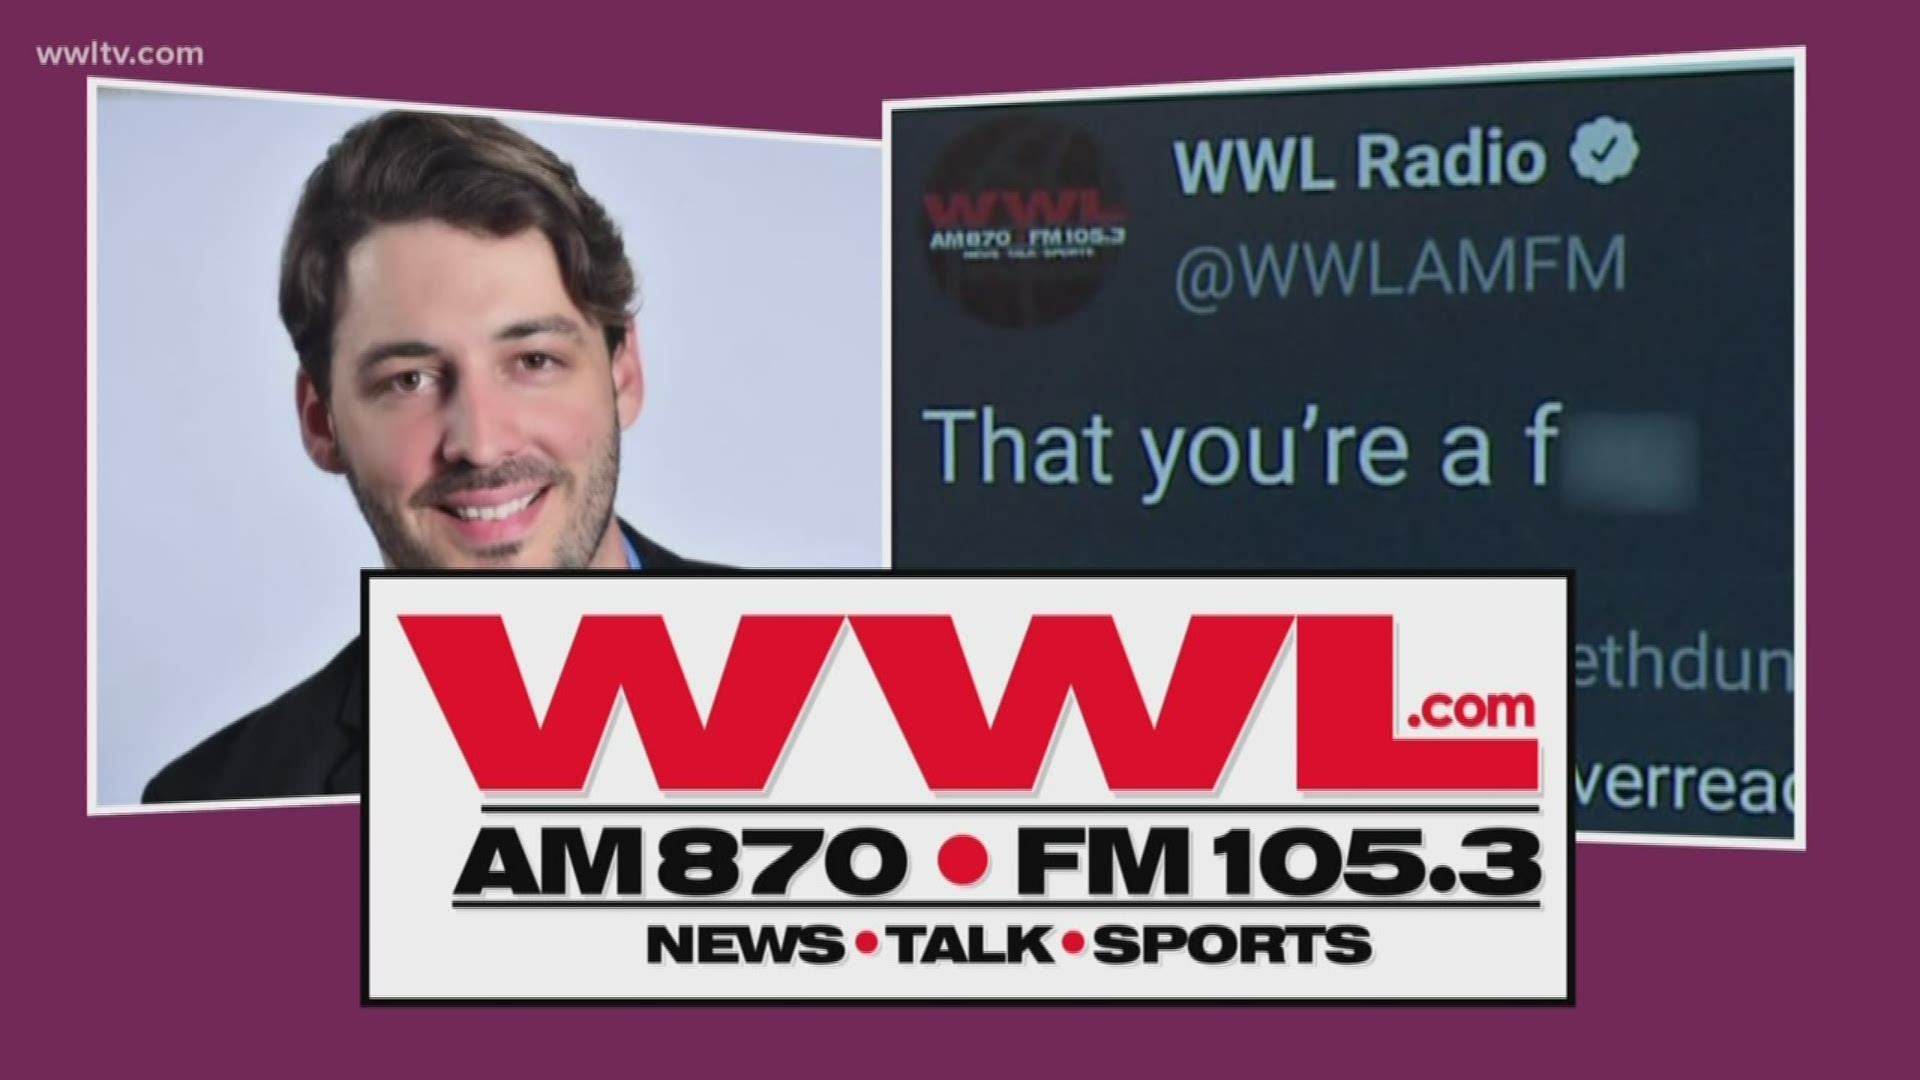 Investigators hope to continue to piece together who sent homophobic slur from WWL Radio’s Twitter account